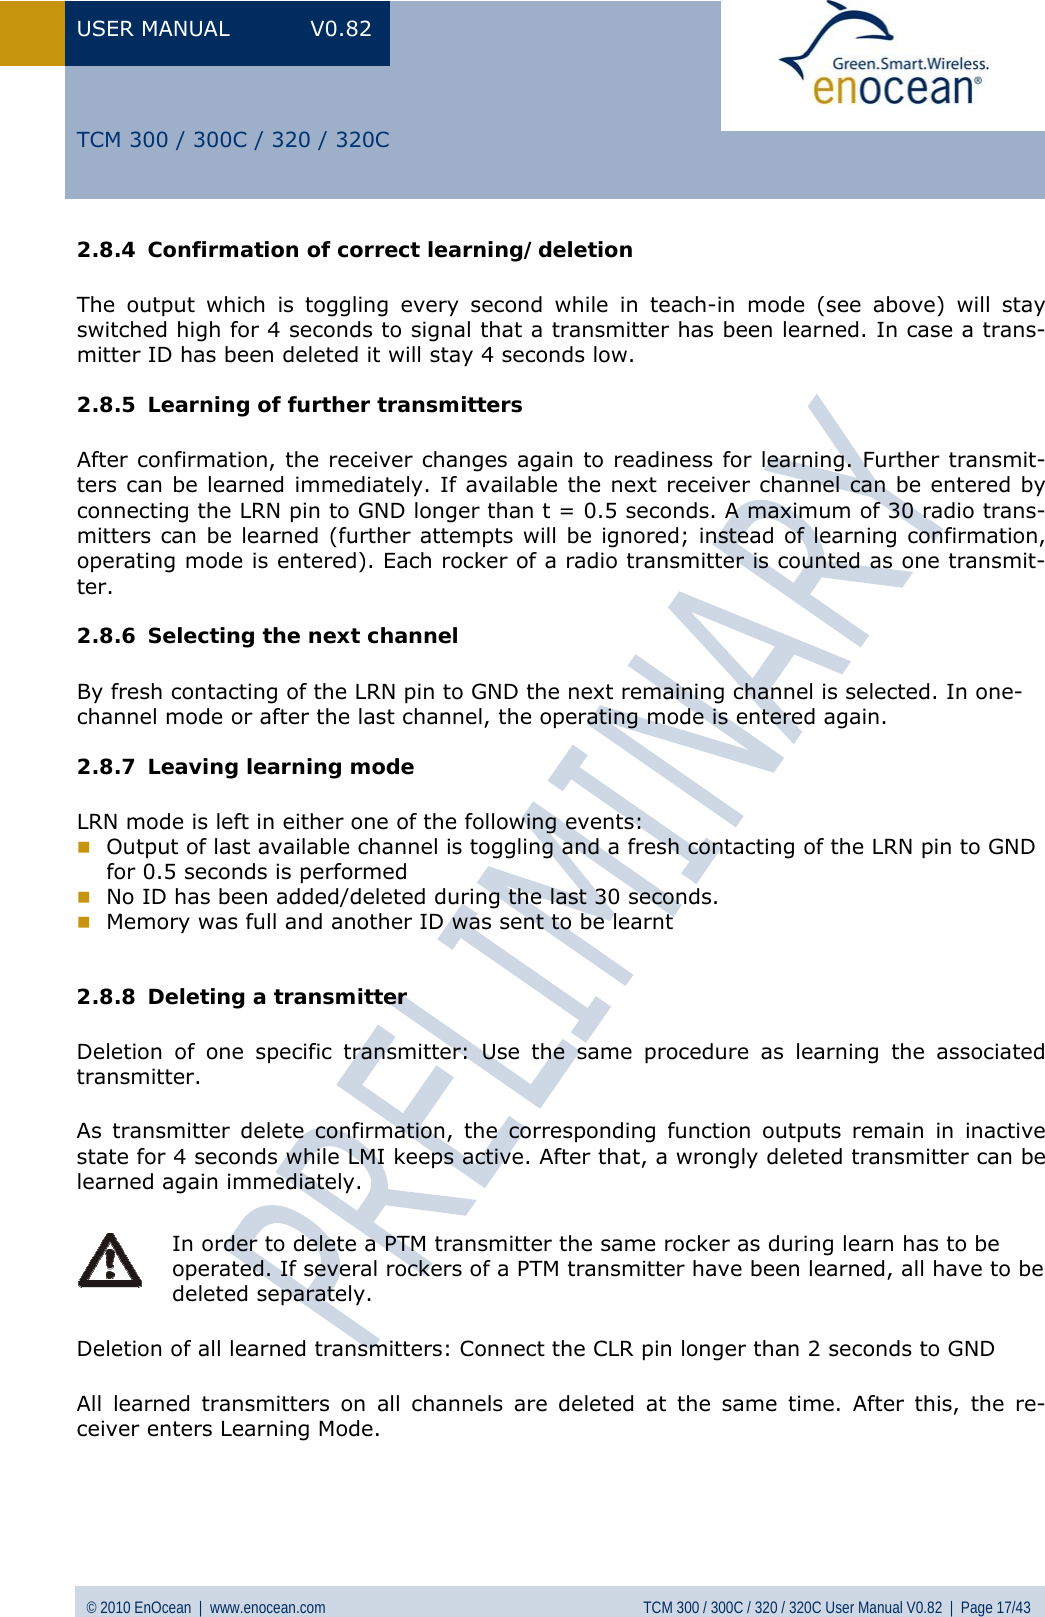 USER MANUAL V0.82 © 2010 EnOcean  |  www.enocean.com  TCM 300 / 300C / 320 / 320C User Manual V0.82  |  Page 17/43   TCM 300 / 300C / 320 / 320C 2.8.4 Confirmation of correct learning/deletion The output which is toggling every second while in teach-in mode (see above) will stay switched high for 4 seconds to signal that a transmitter has been learned. In case a trans-mitter ID has been deleted it will stay 4 seconds low. 2.8.5 Learning of further transmitters After confirmation, the receiver changes again to readiness for learning. Further transmit-ters can be learned immediately. If available the next receiver channel can be entered by connecting the LRN pin to GND longer than t = 0.5 seconds. A maximum of 30 radio trans-mitters can be learned (further attempts will be ignored; instead of learning confirmation, operating mode is entered). Each rocker of a radio transmitter is counted as one transmit-ter. 2.8.6 Selecting the next channel  By fresh contacting of the LRN pin to GND the next remaining channel is selected. In one-channel mode or after the last channel, the operating mode is entered again. 2.8.7 Leaving learning mode LRN mode is left in either one of the following events:  Output of last available channel is toggling and a fresh contacting of the LRN pin to GND for 0.5 seconds is performed  No ID has been added/deleted during the last 30 seconds.  Memory was full and another ID was sent to be learnt  2.8.8 Deleting a transmitter Deletion of one specific transmitter: Use the same procedure as learning the associated transmitter. As transmitter delete confirmation, the corresponding function outputs remain in inactive state for 4 seconds while LMI keeps active. After that, a wrongly deleted transmitter can be learned again immediately.    In order to delete a PTM transmitter the same rocker as during learn has to be operated. If several rockers of a PTM transmitter have been learned, all have to be deleted separately.  Deletion of all learned transmitters: Connect the CLR pin longer than 2 seconds to GND All learned transmitters on all channels are deleted at the same time. After this, the re-ceiver enters Learning Mode.  